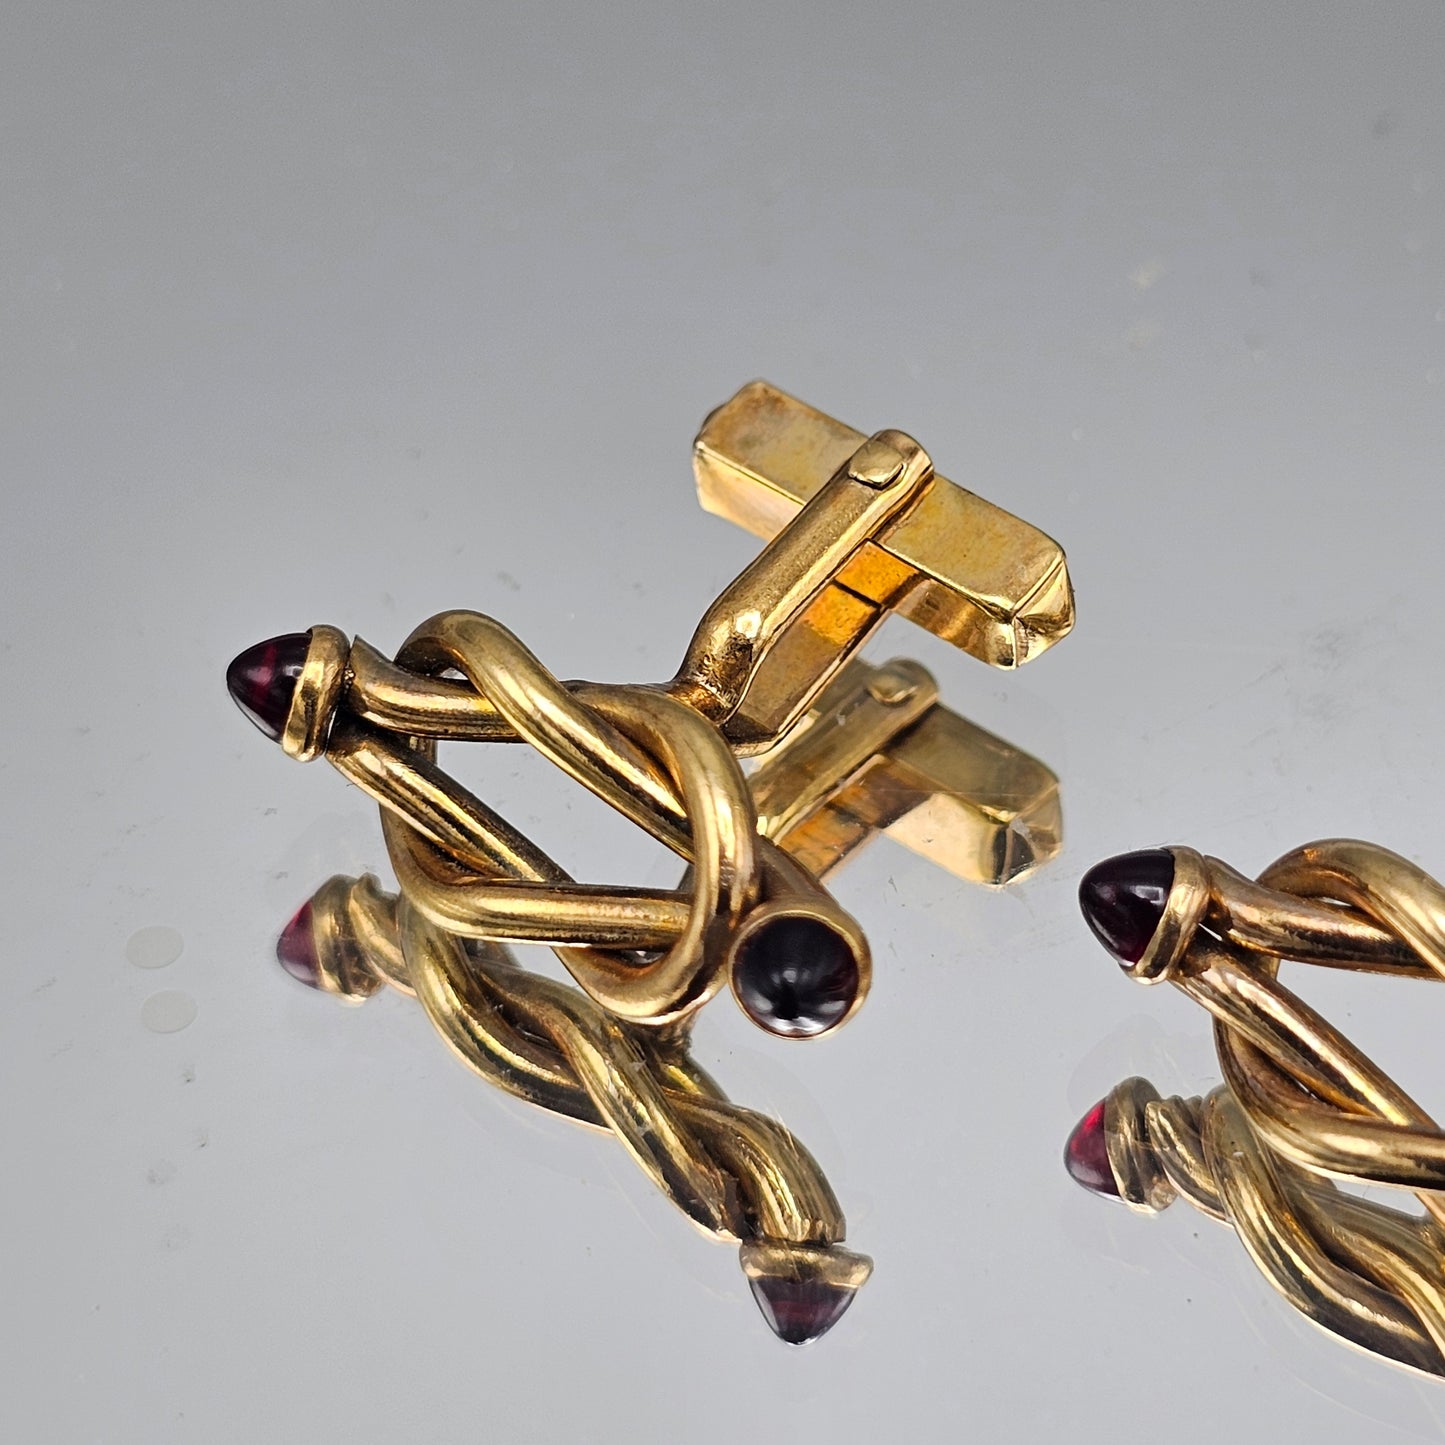 Vintage Swank Gold Plated Knot Design Cufflinks with Red Glass Ends